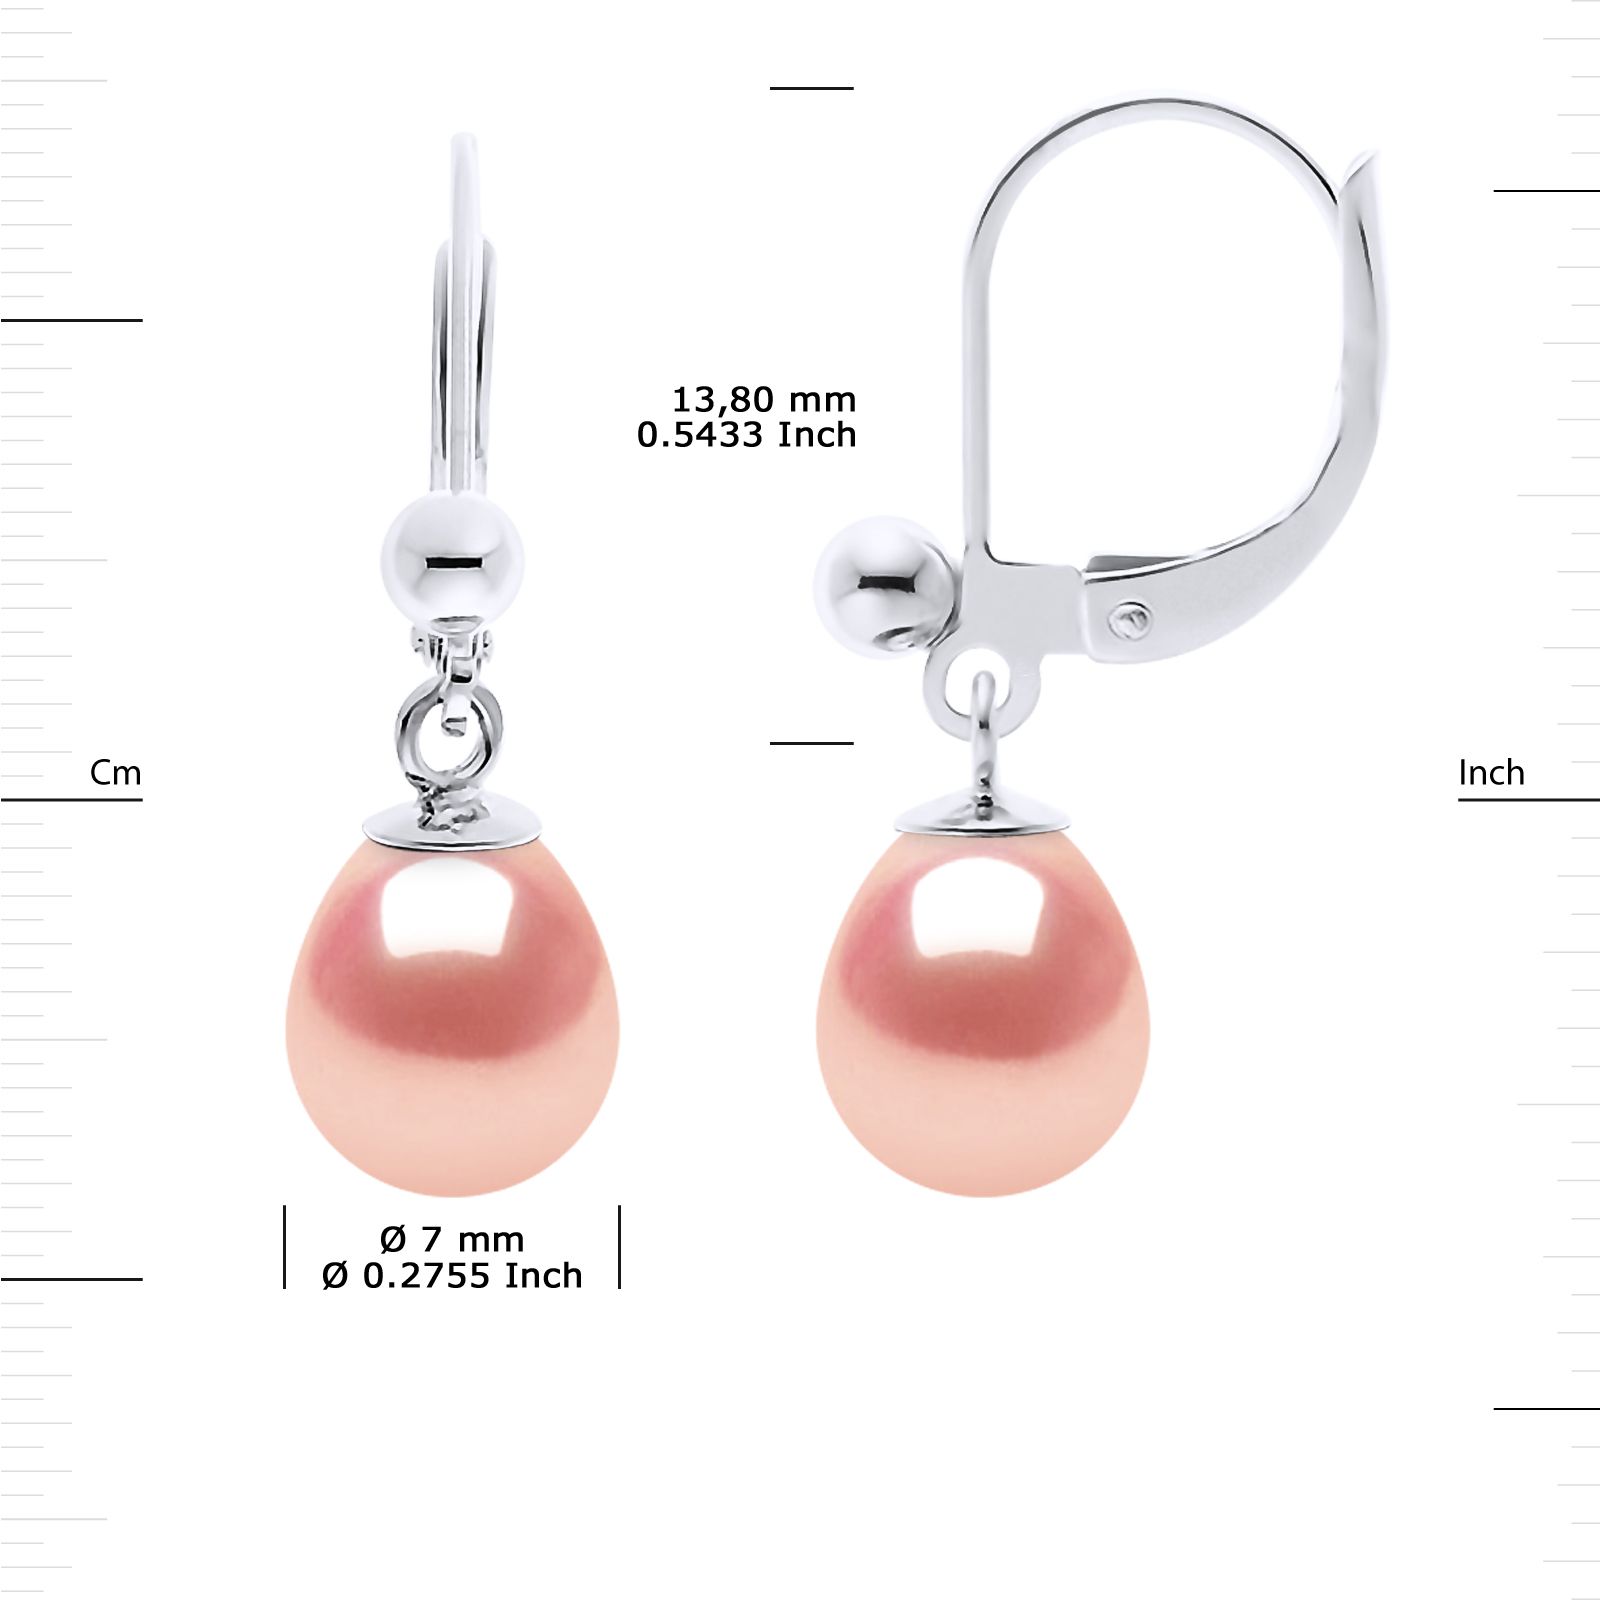 Earrings of 925 Sterling Silver and true Cultured Freshwater Pearls Pear Shape 7-8 mm - 0,31 in - Natural Pink Color and Break system -- Our jewellery is made in France and will be delivered in a gift box accompanied by a Certificate of Authenticity and International Warranty